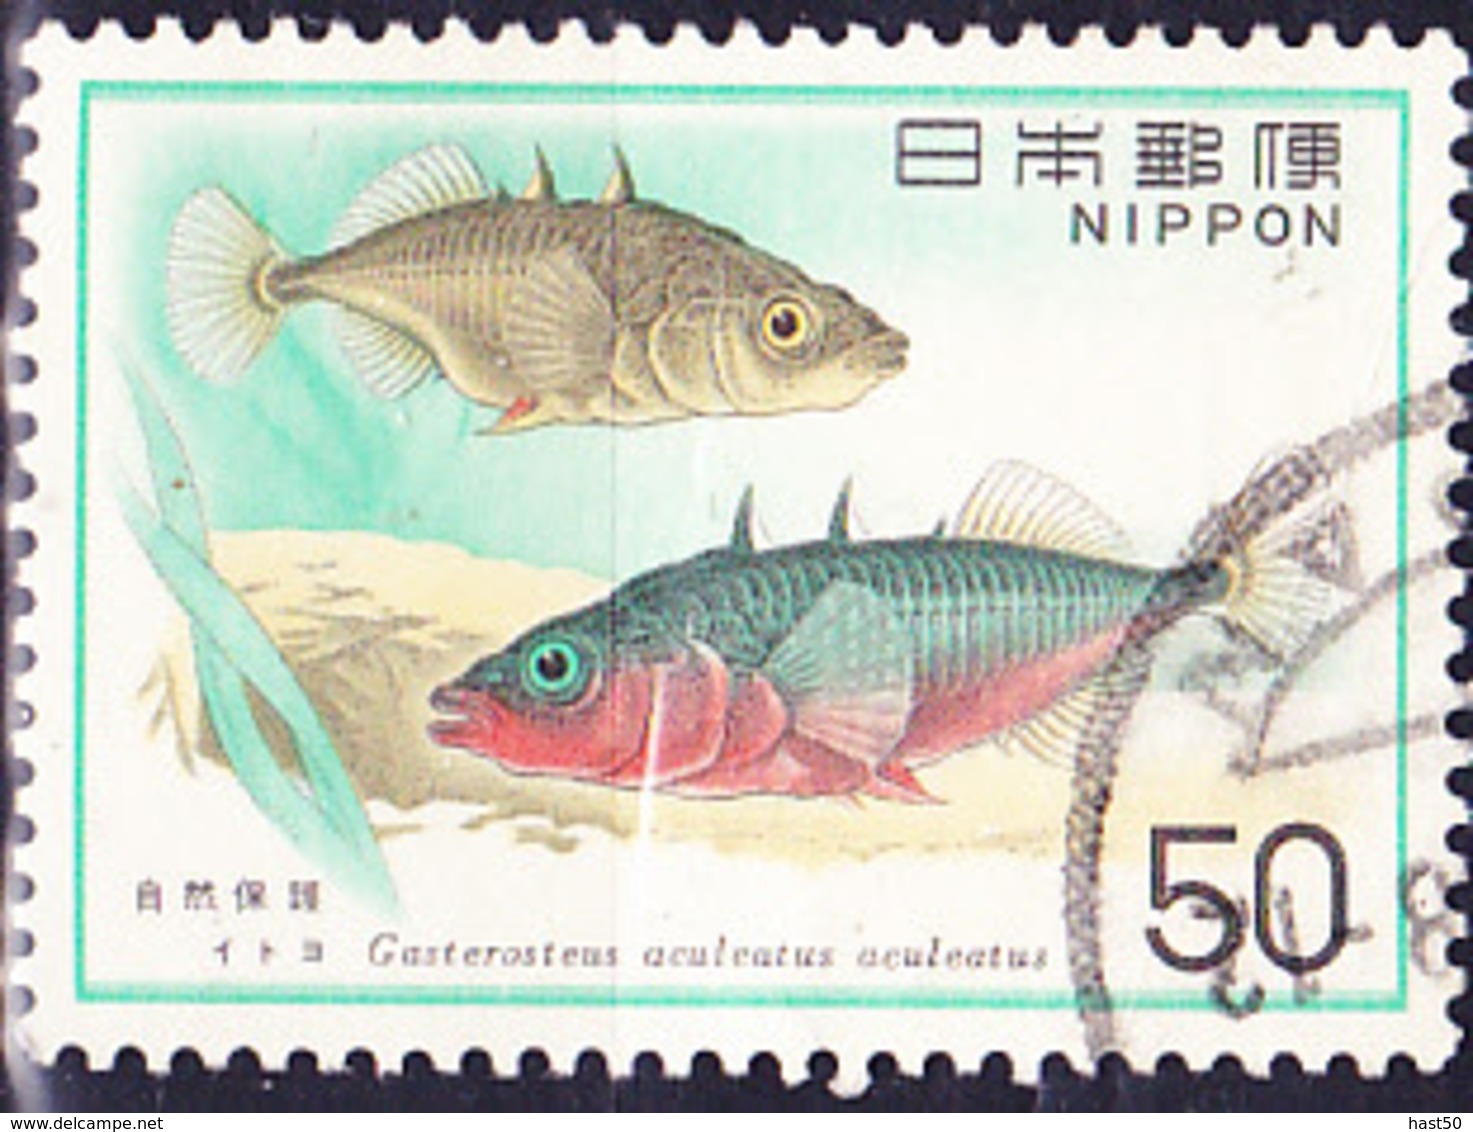 Japan - Dreistacheliger Stichling (Gasterosteus Aculeatus) (MiNr: 1297) 1976 - Gest Used Obl - Used Stamps